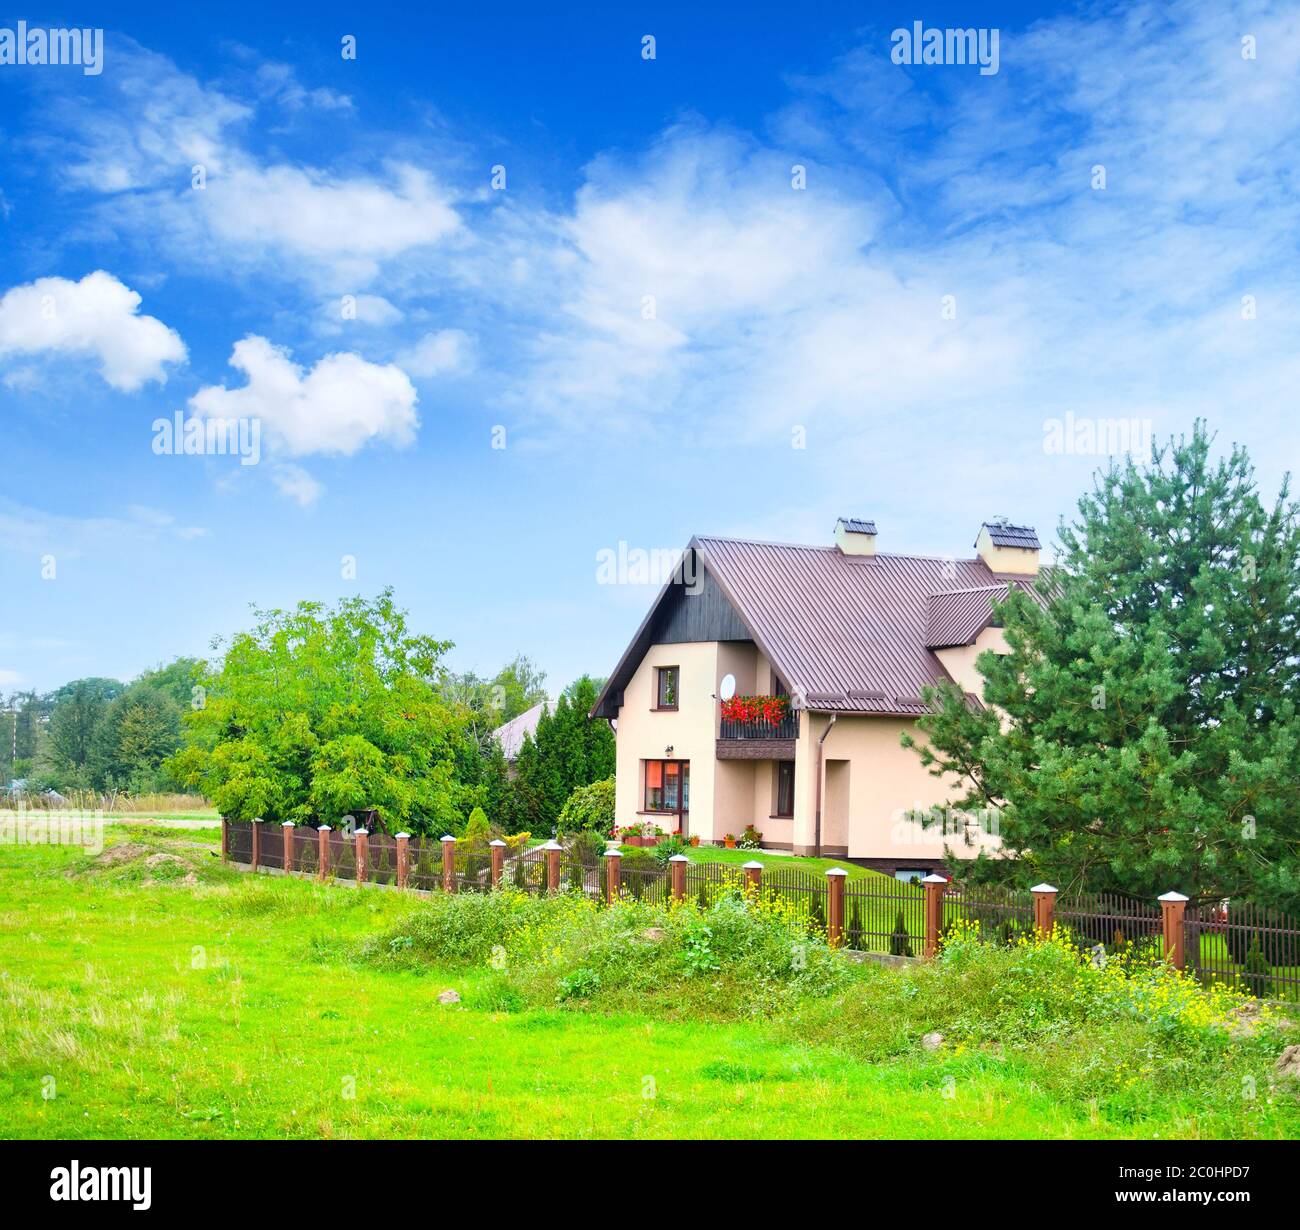 House in Polland Stock Photo